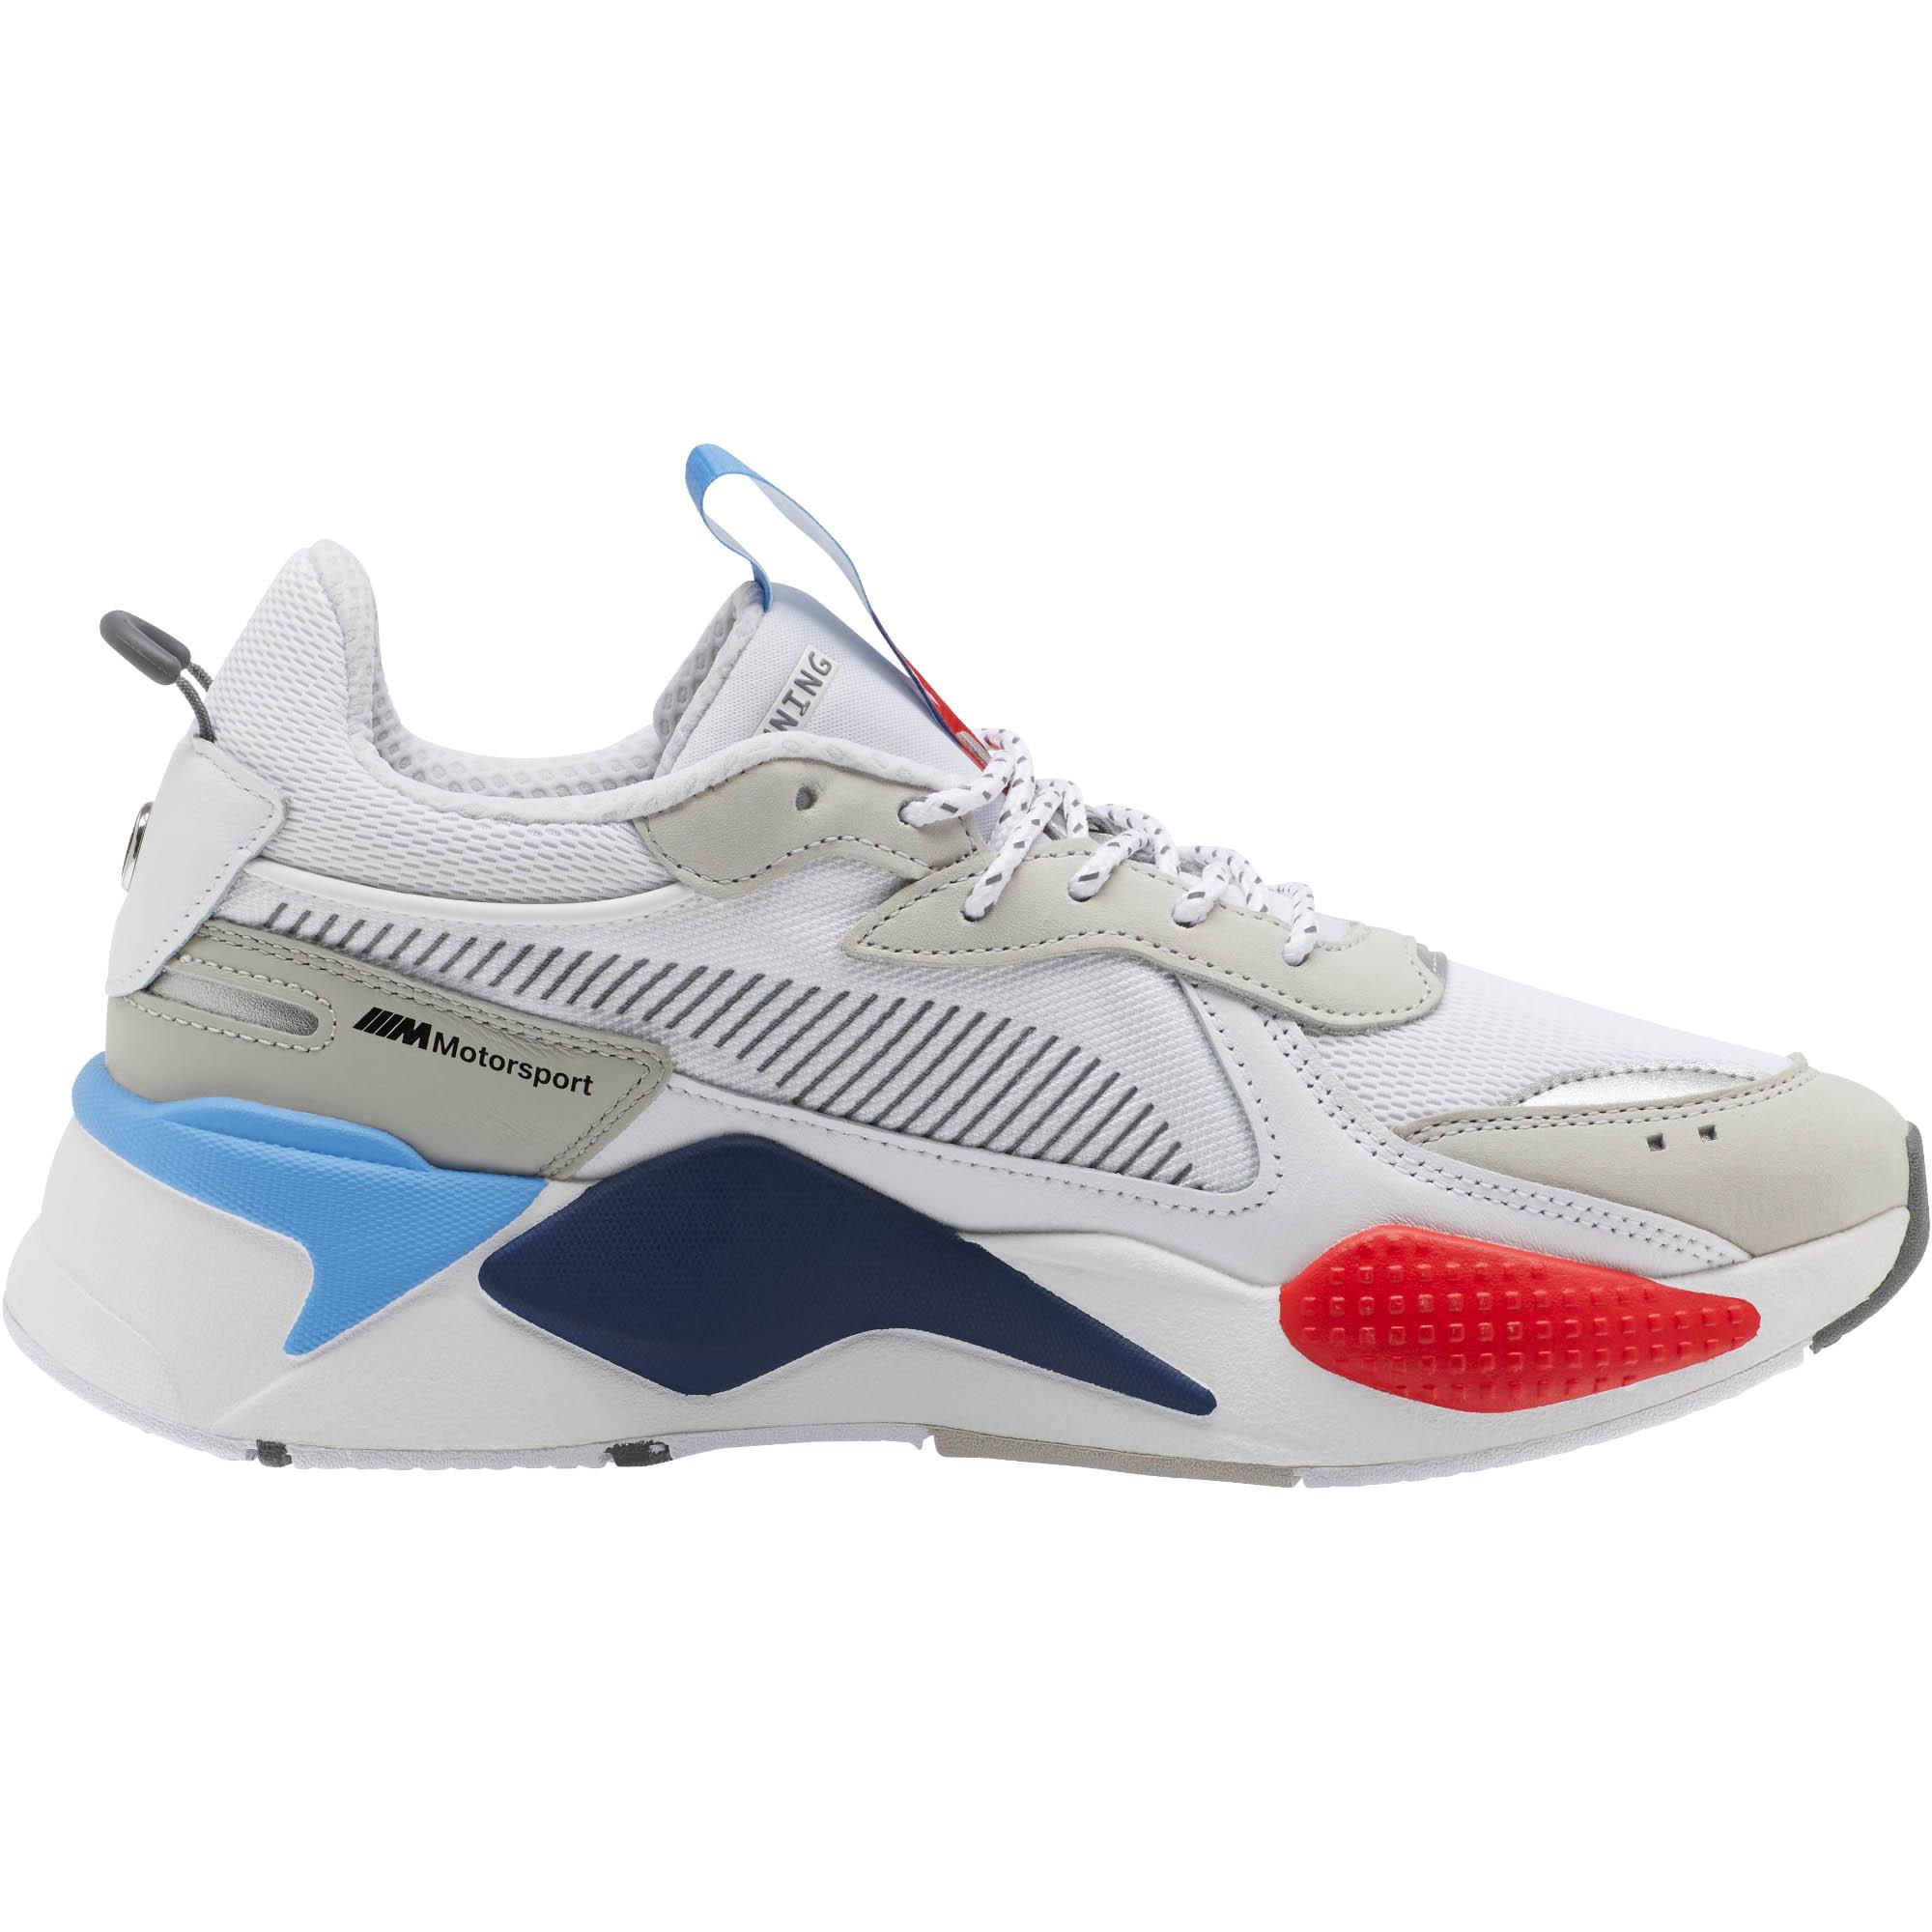 PUMA Leather Rs-x Bmw Mms Sneakers in White for Men - Lyst